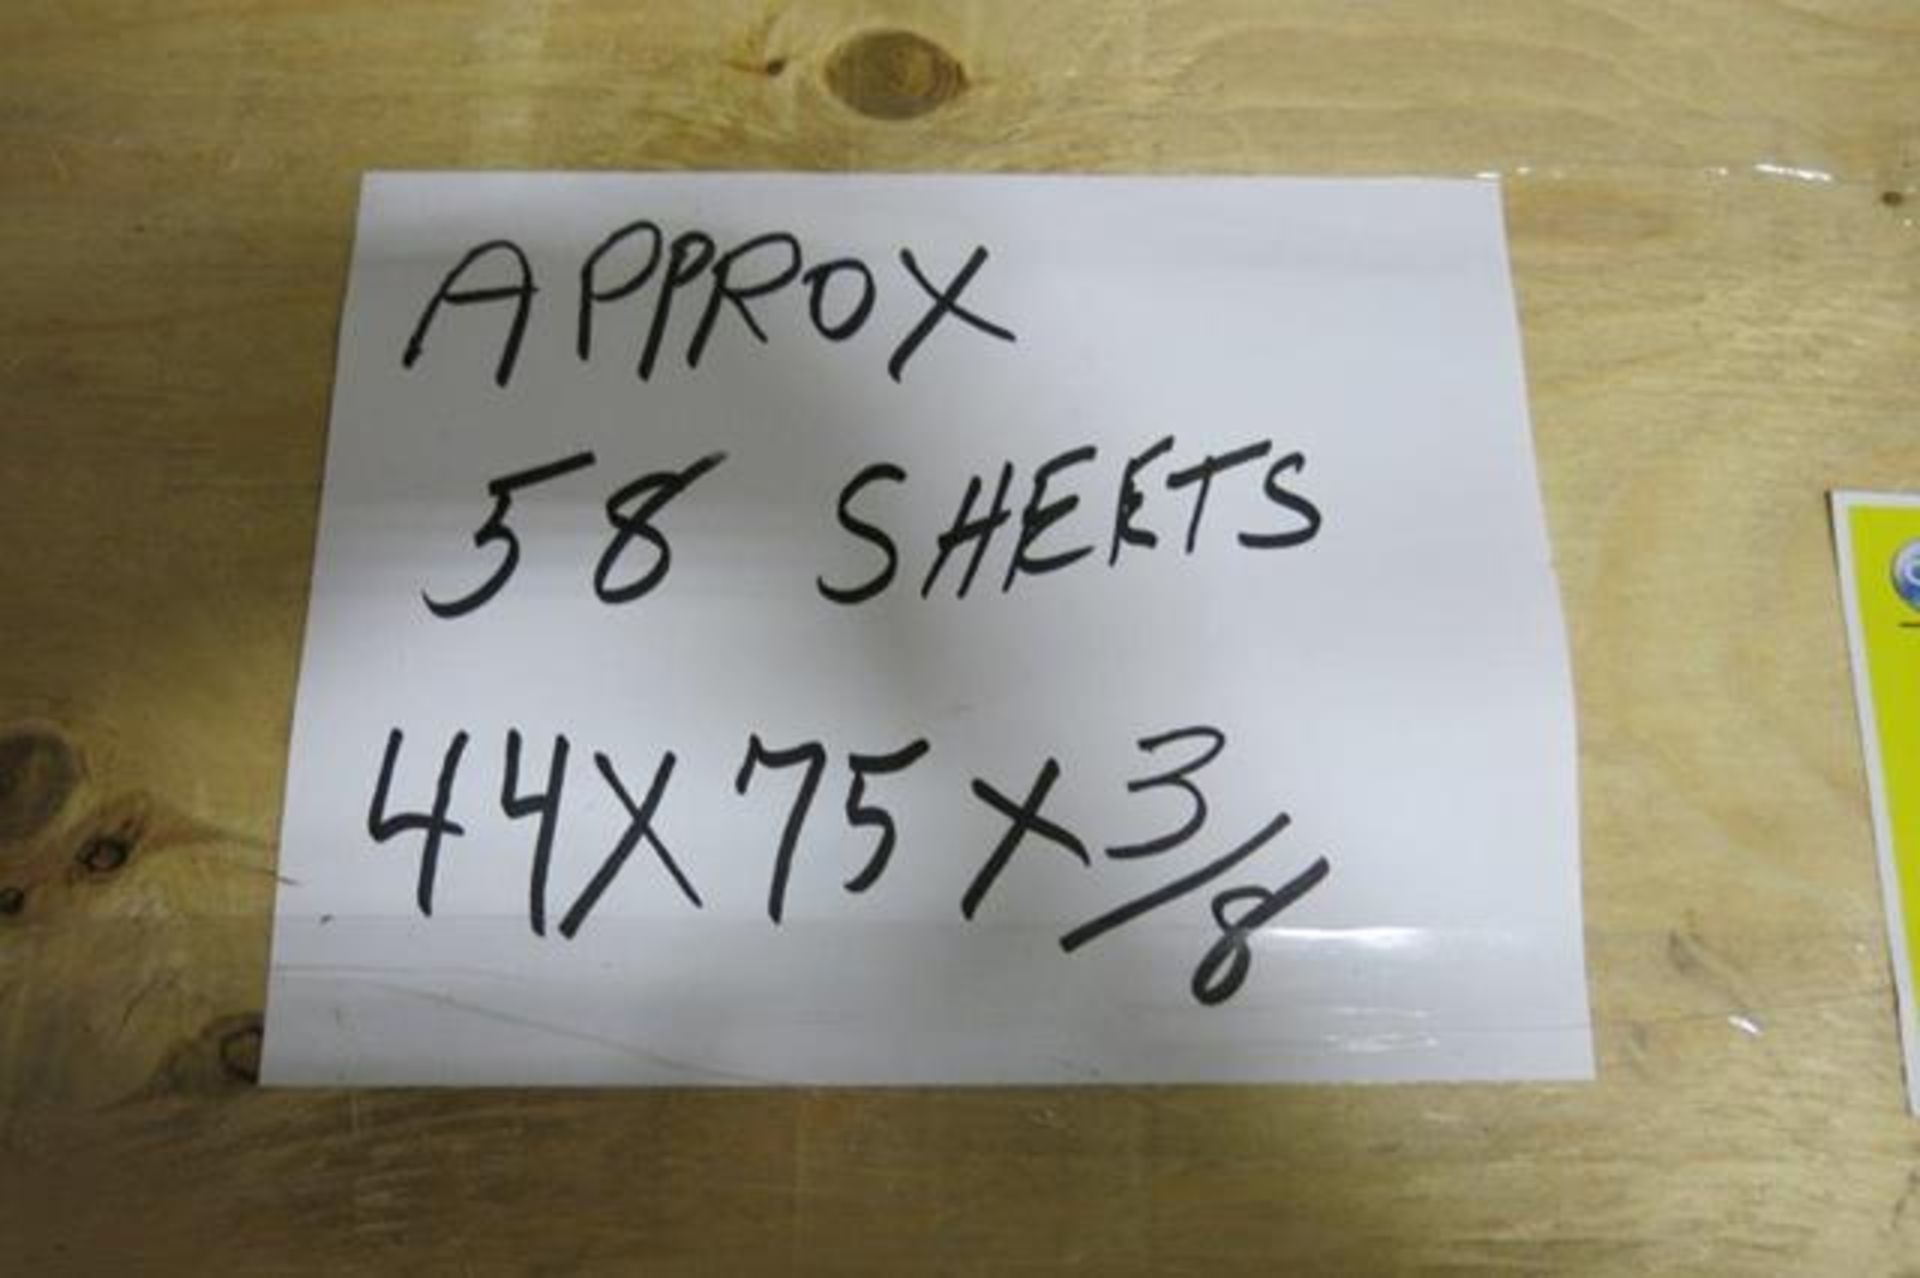 LOT OF 58 SHEETS (APPROX.) OF 44" X 75" X 3/8", PLYWOOD - Image 3 of 3